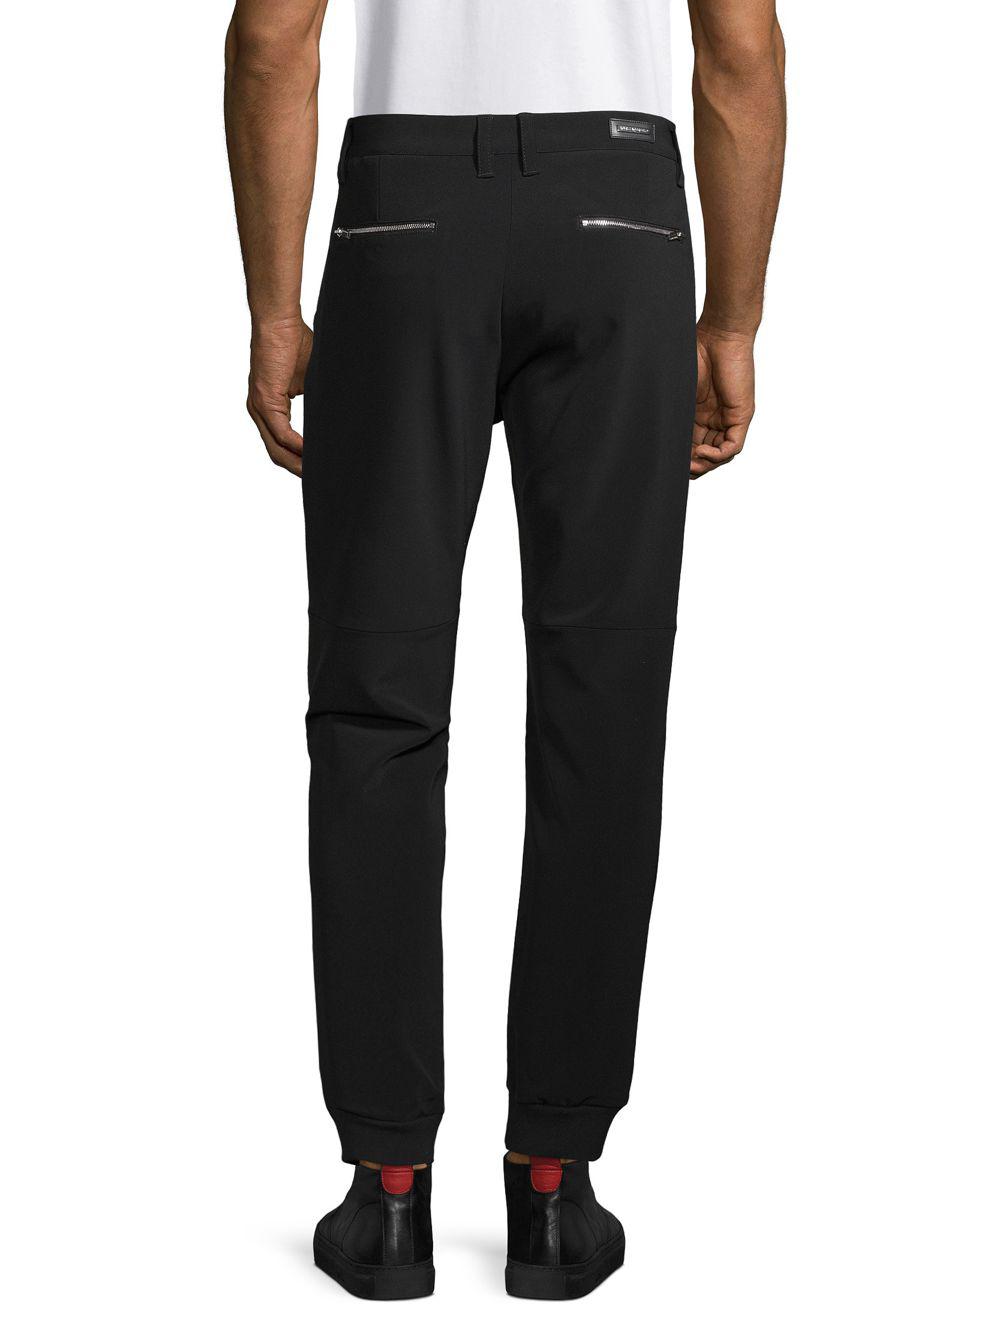 Karl Lagerfeld Synthetic Classic Pants in Black for Men - Lyst